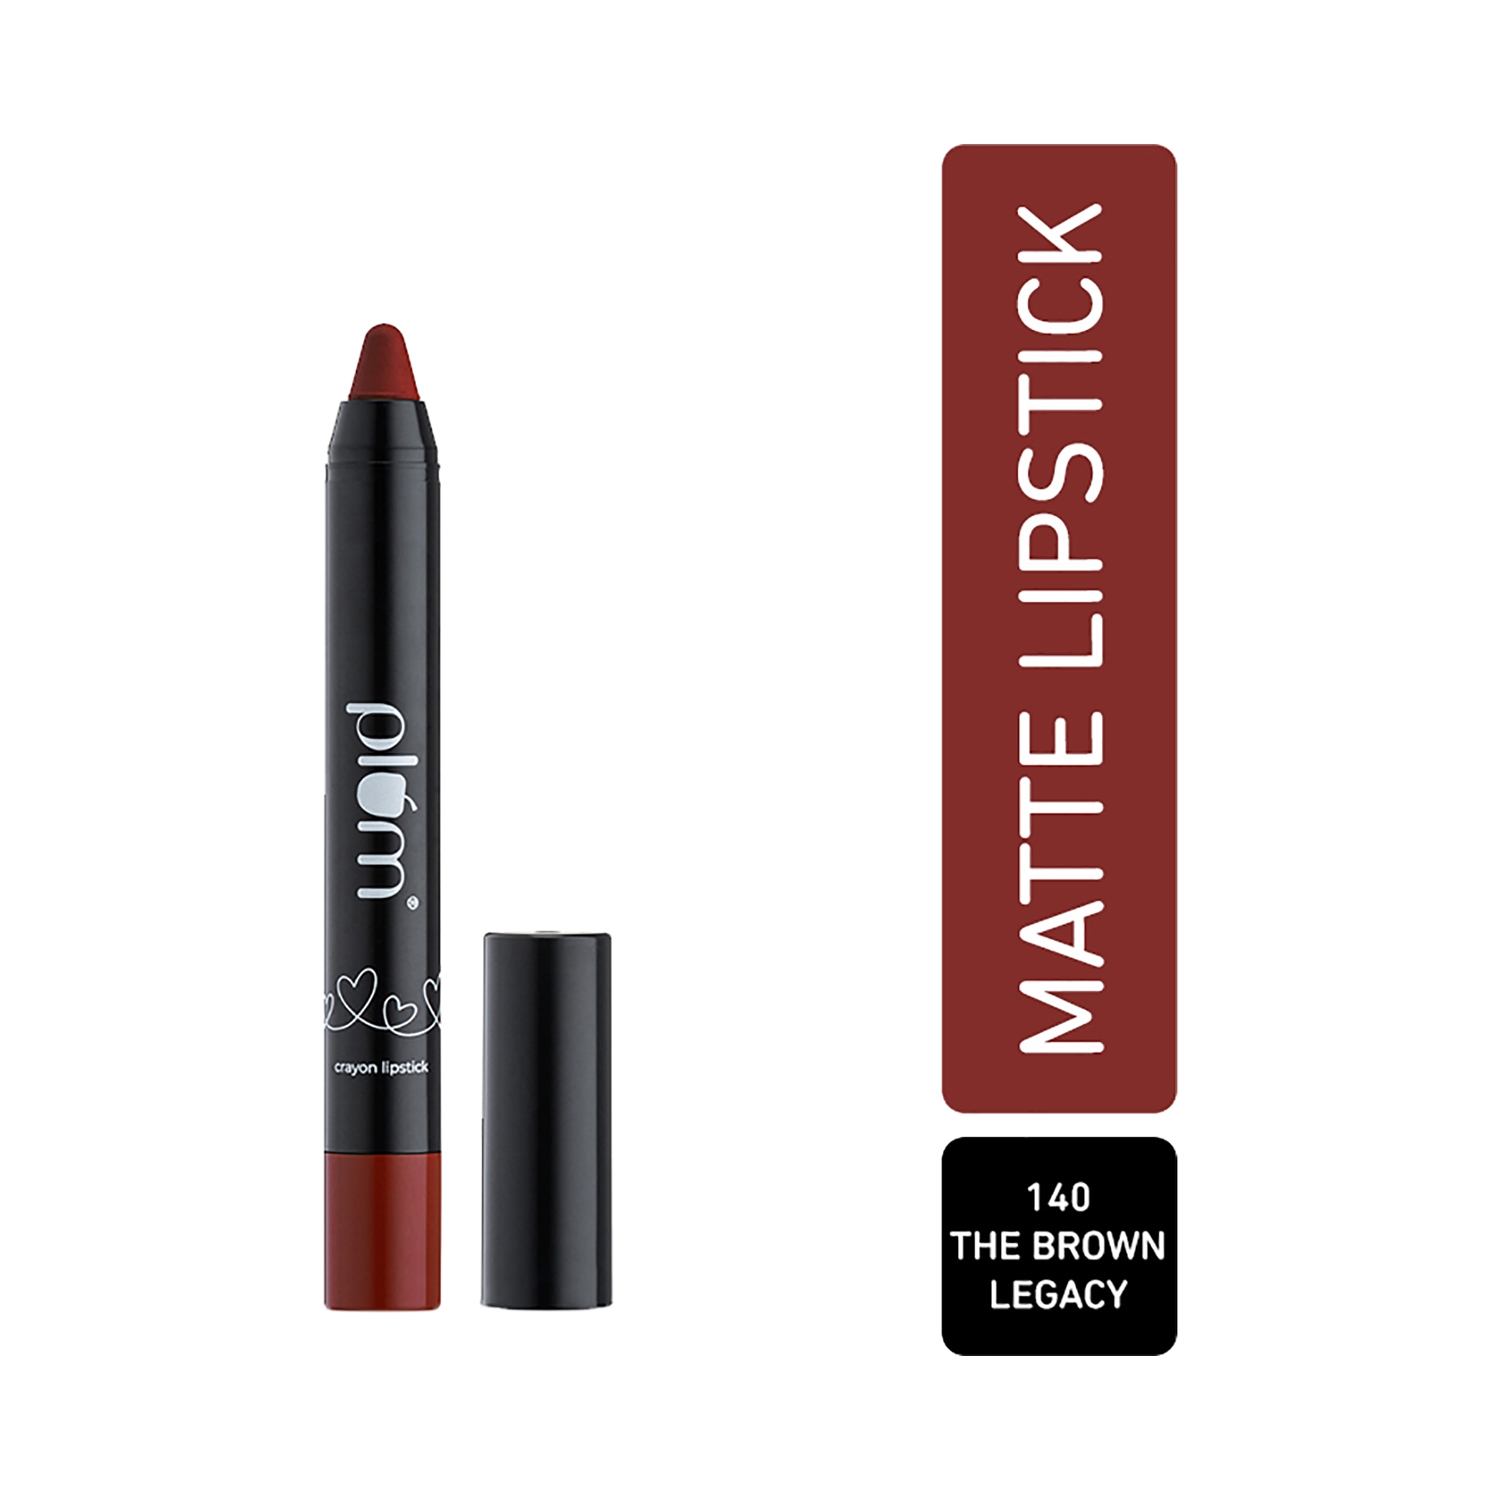 Plum | Plum Twist & Go Matte Crayon Lipstick with Ceramides & Hyaluronic Acid - 140 The Brown Legacy (1.8g)